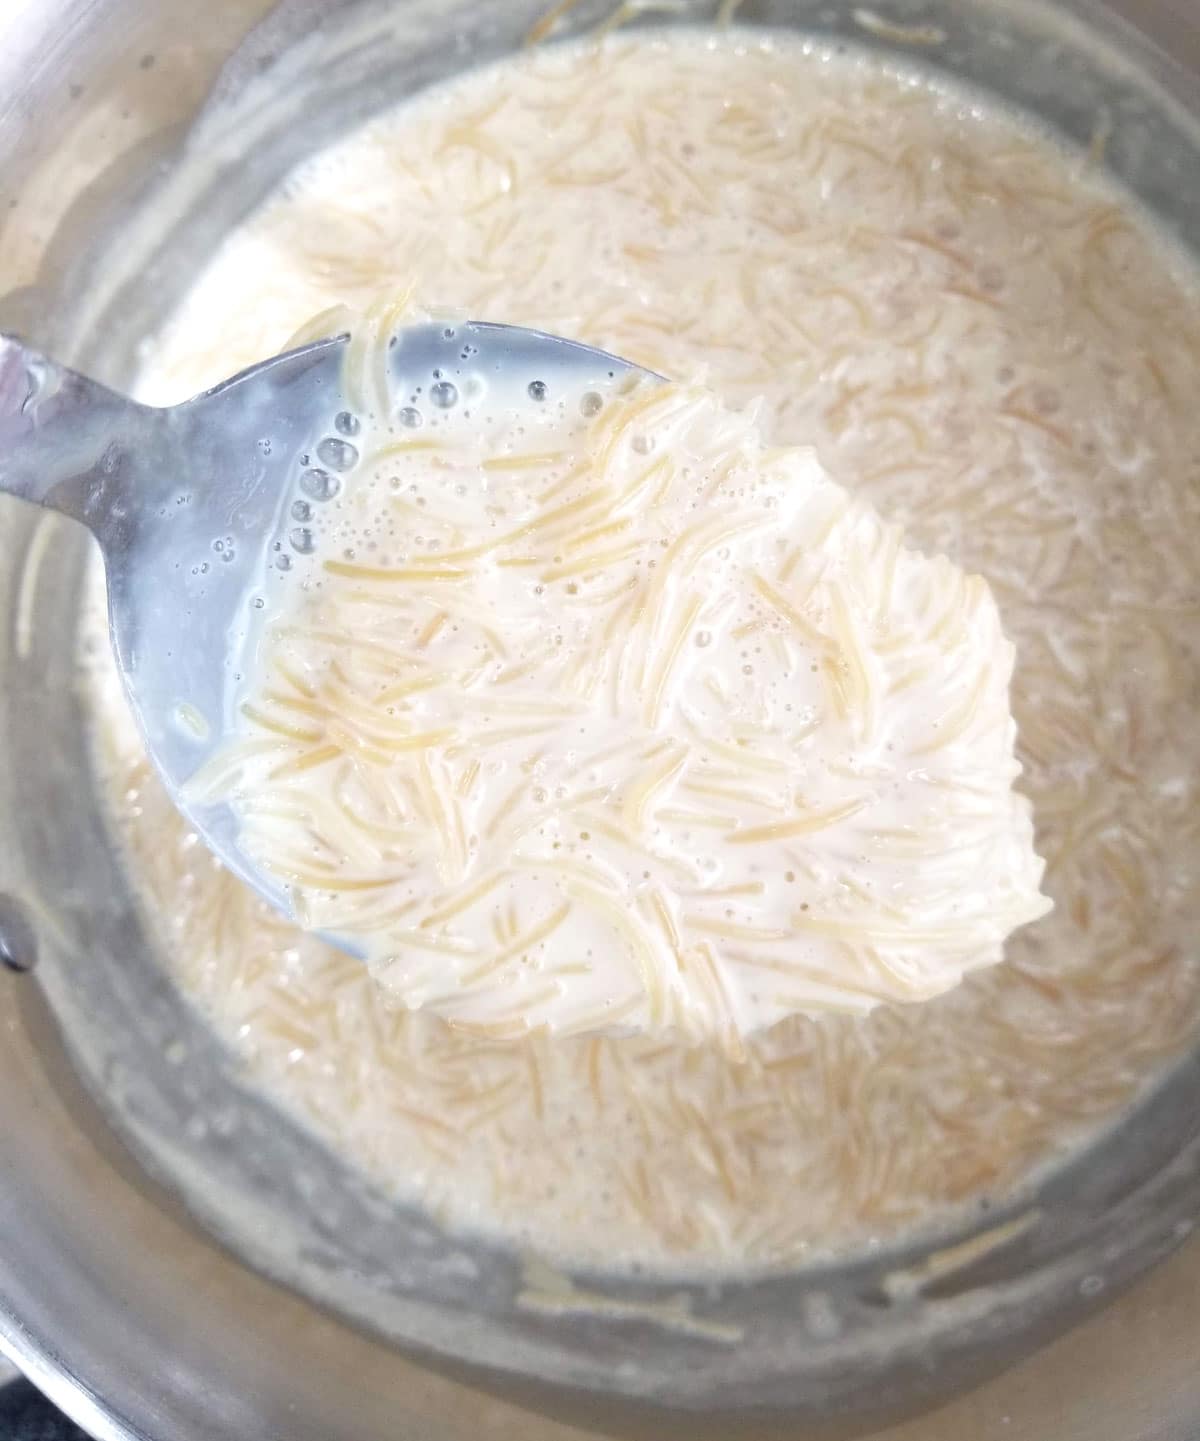 vermicelli pudding with sweetened condensed milk